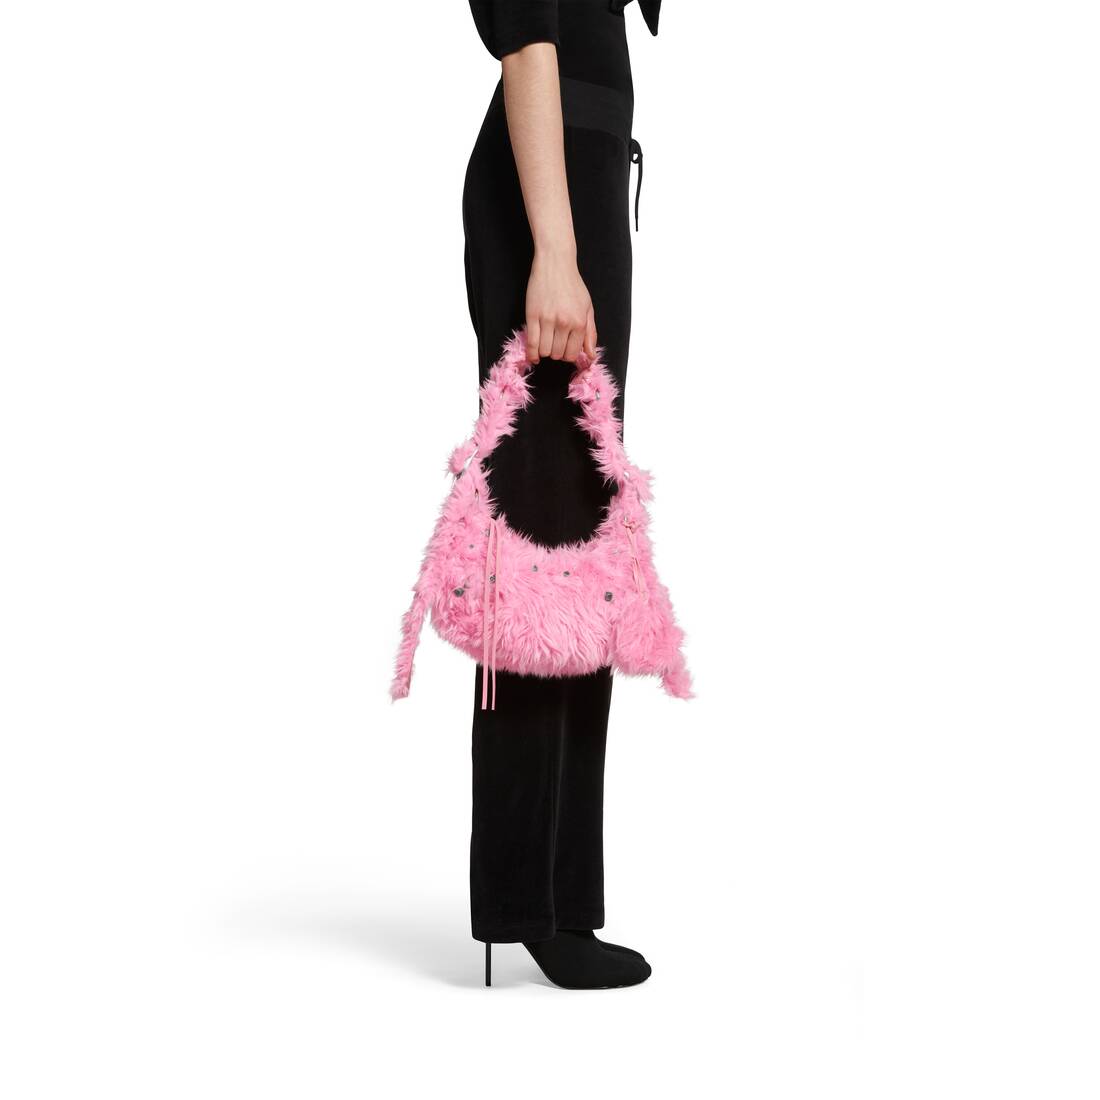 Balenciaga wraps store in pink faux fur to celebrate its Le Cagole it-bag